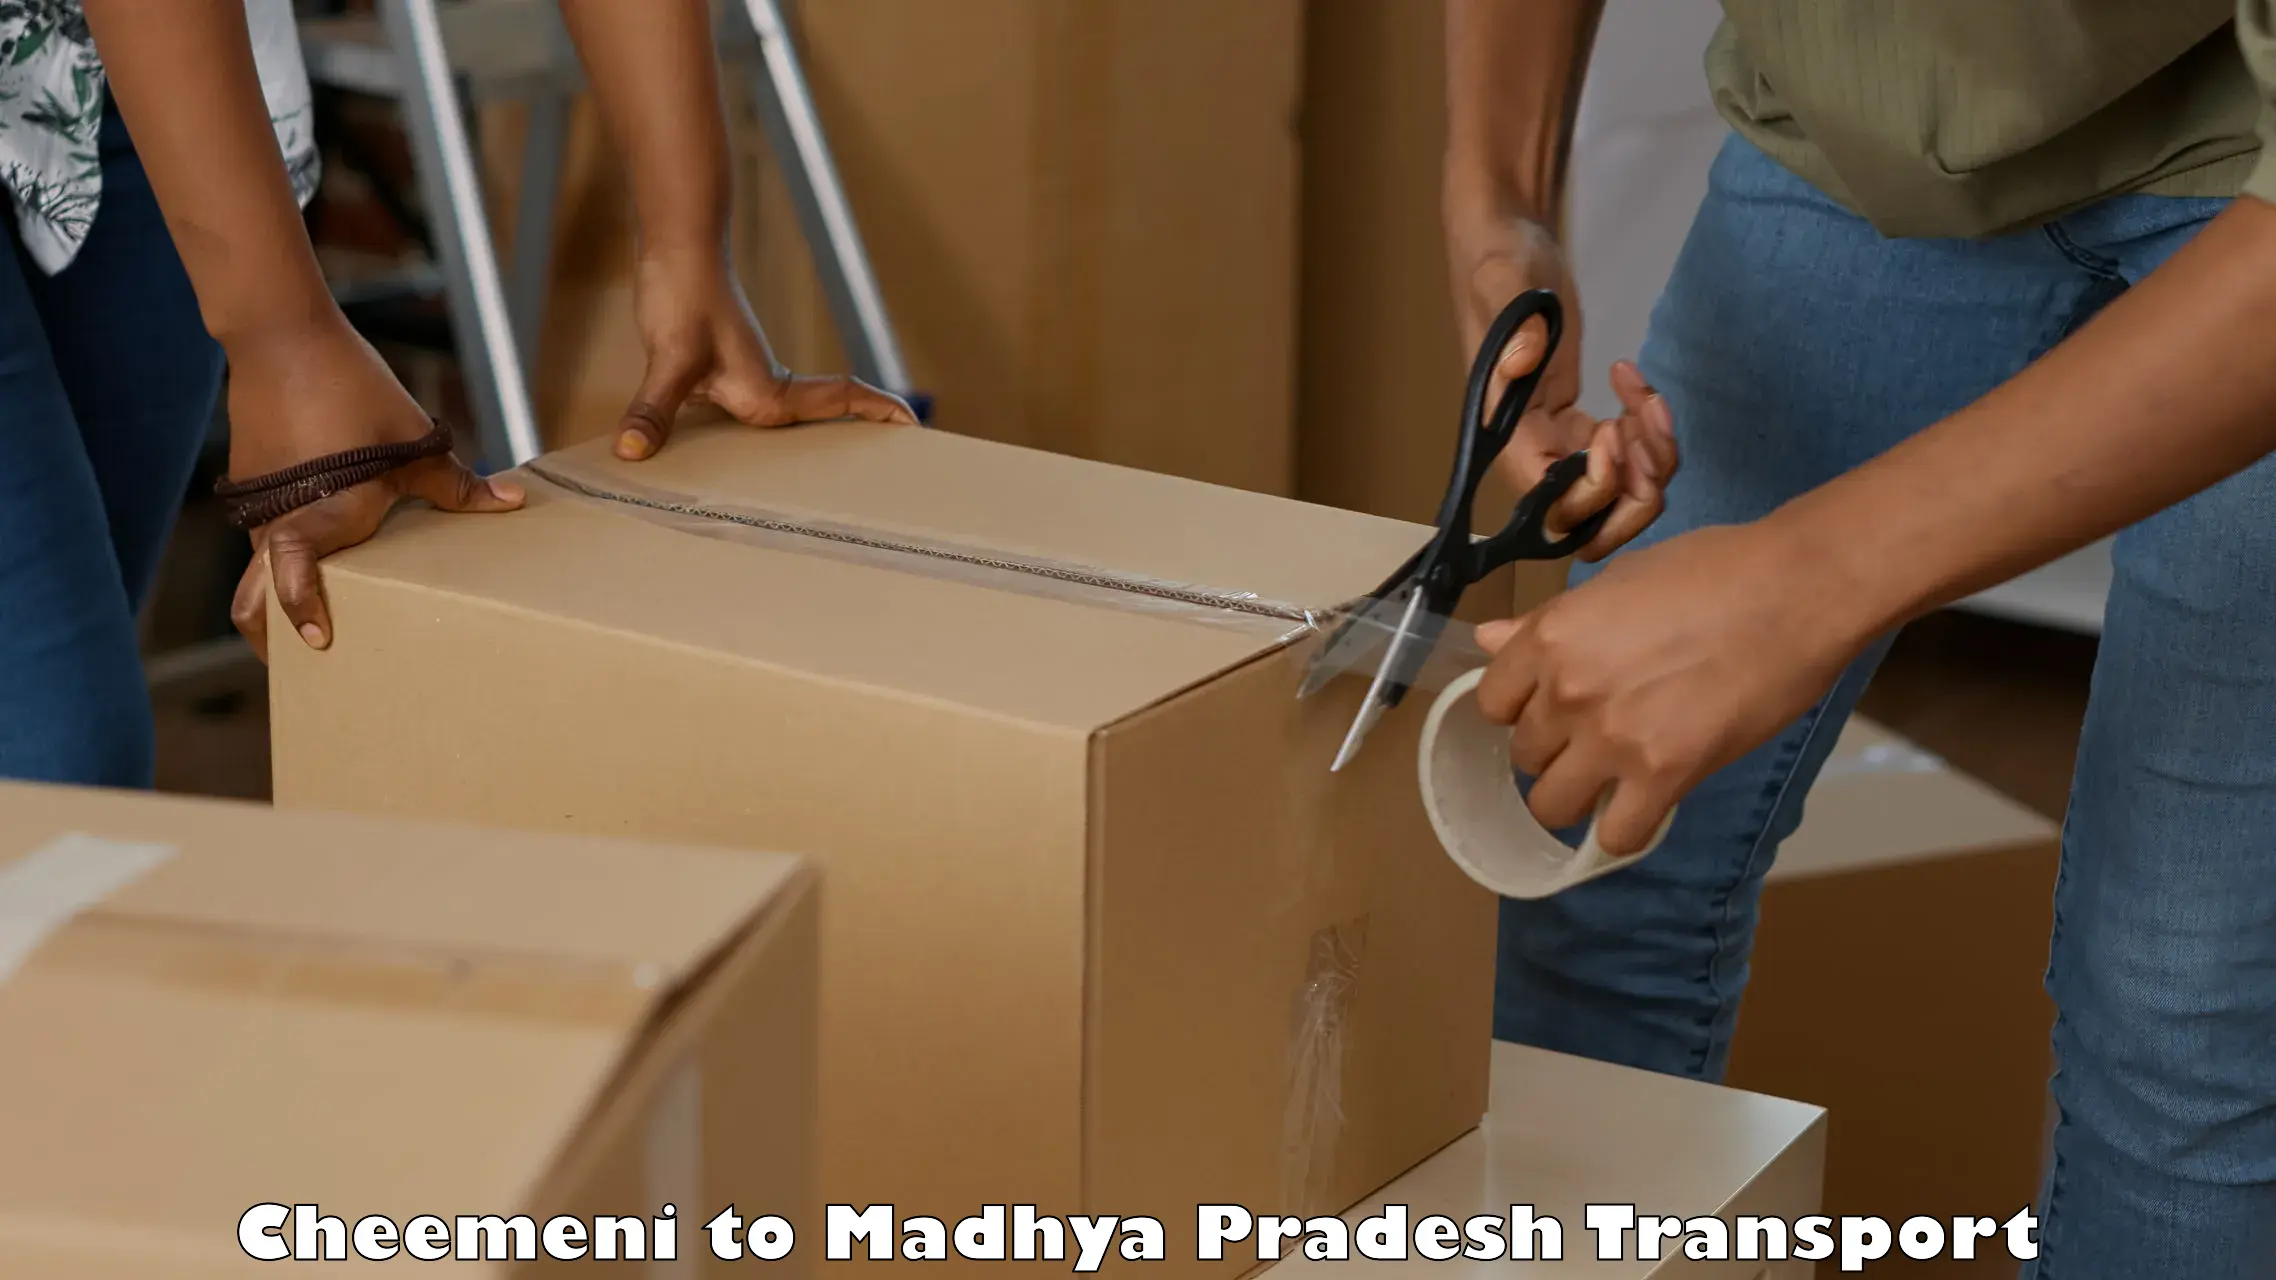 Truck transport companies in India Cheemeni to NIT Bhopal